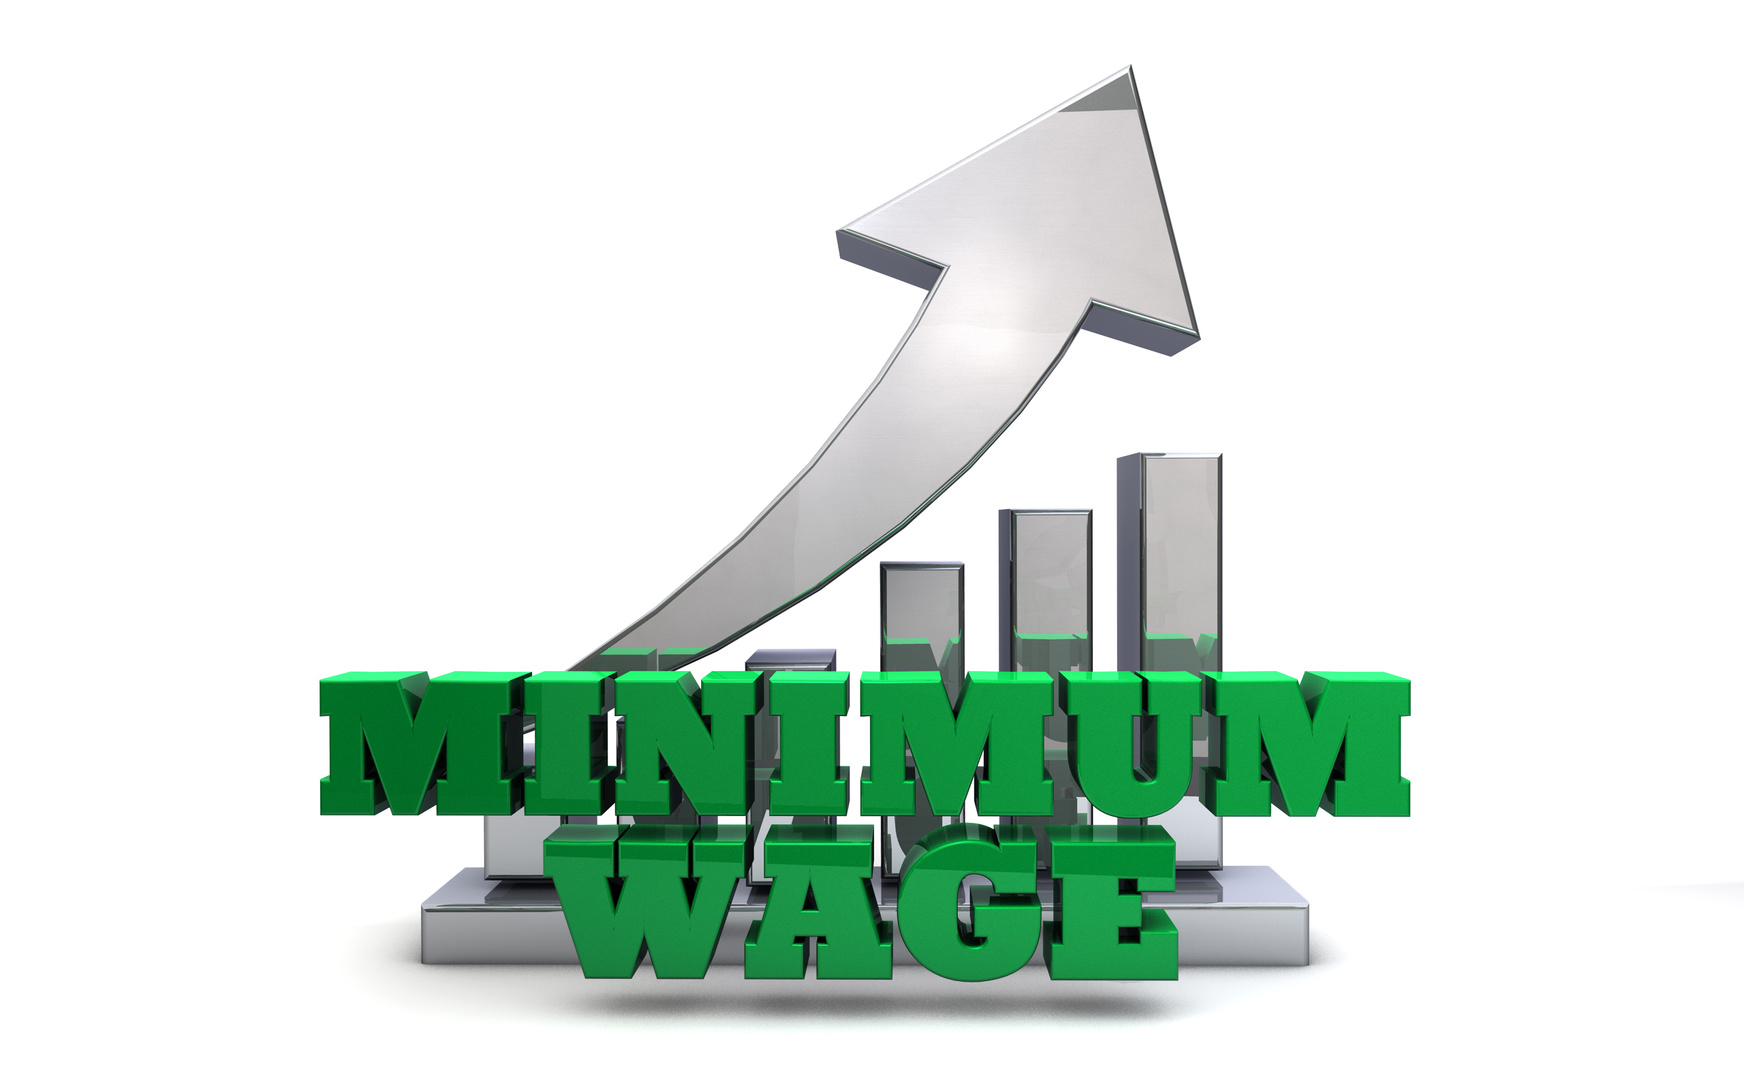 Executive Director’s Message:  Be prepared! Minimum wage rises to $10.10 January 1st, 2018